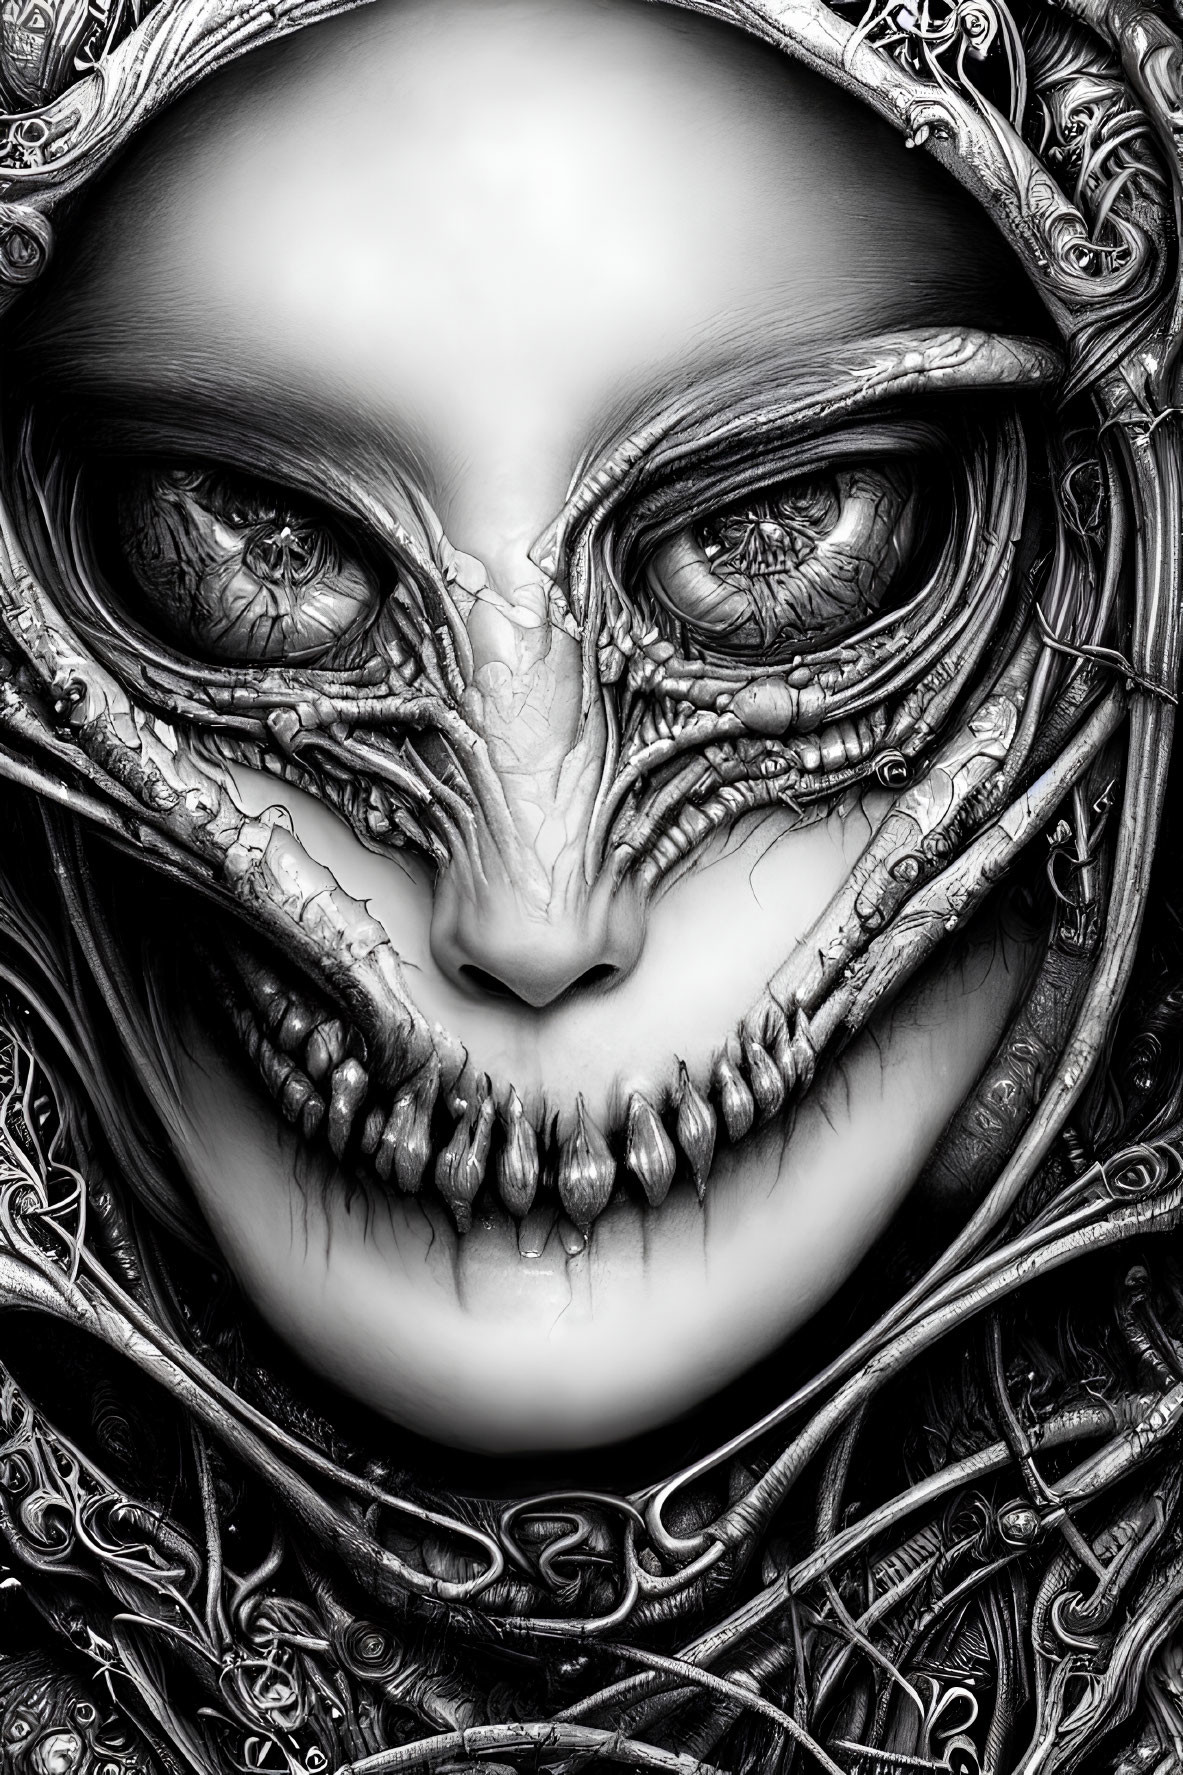 Detailed monochrome humanoid creature with skeletal and mechanical features in ornate frame